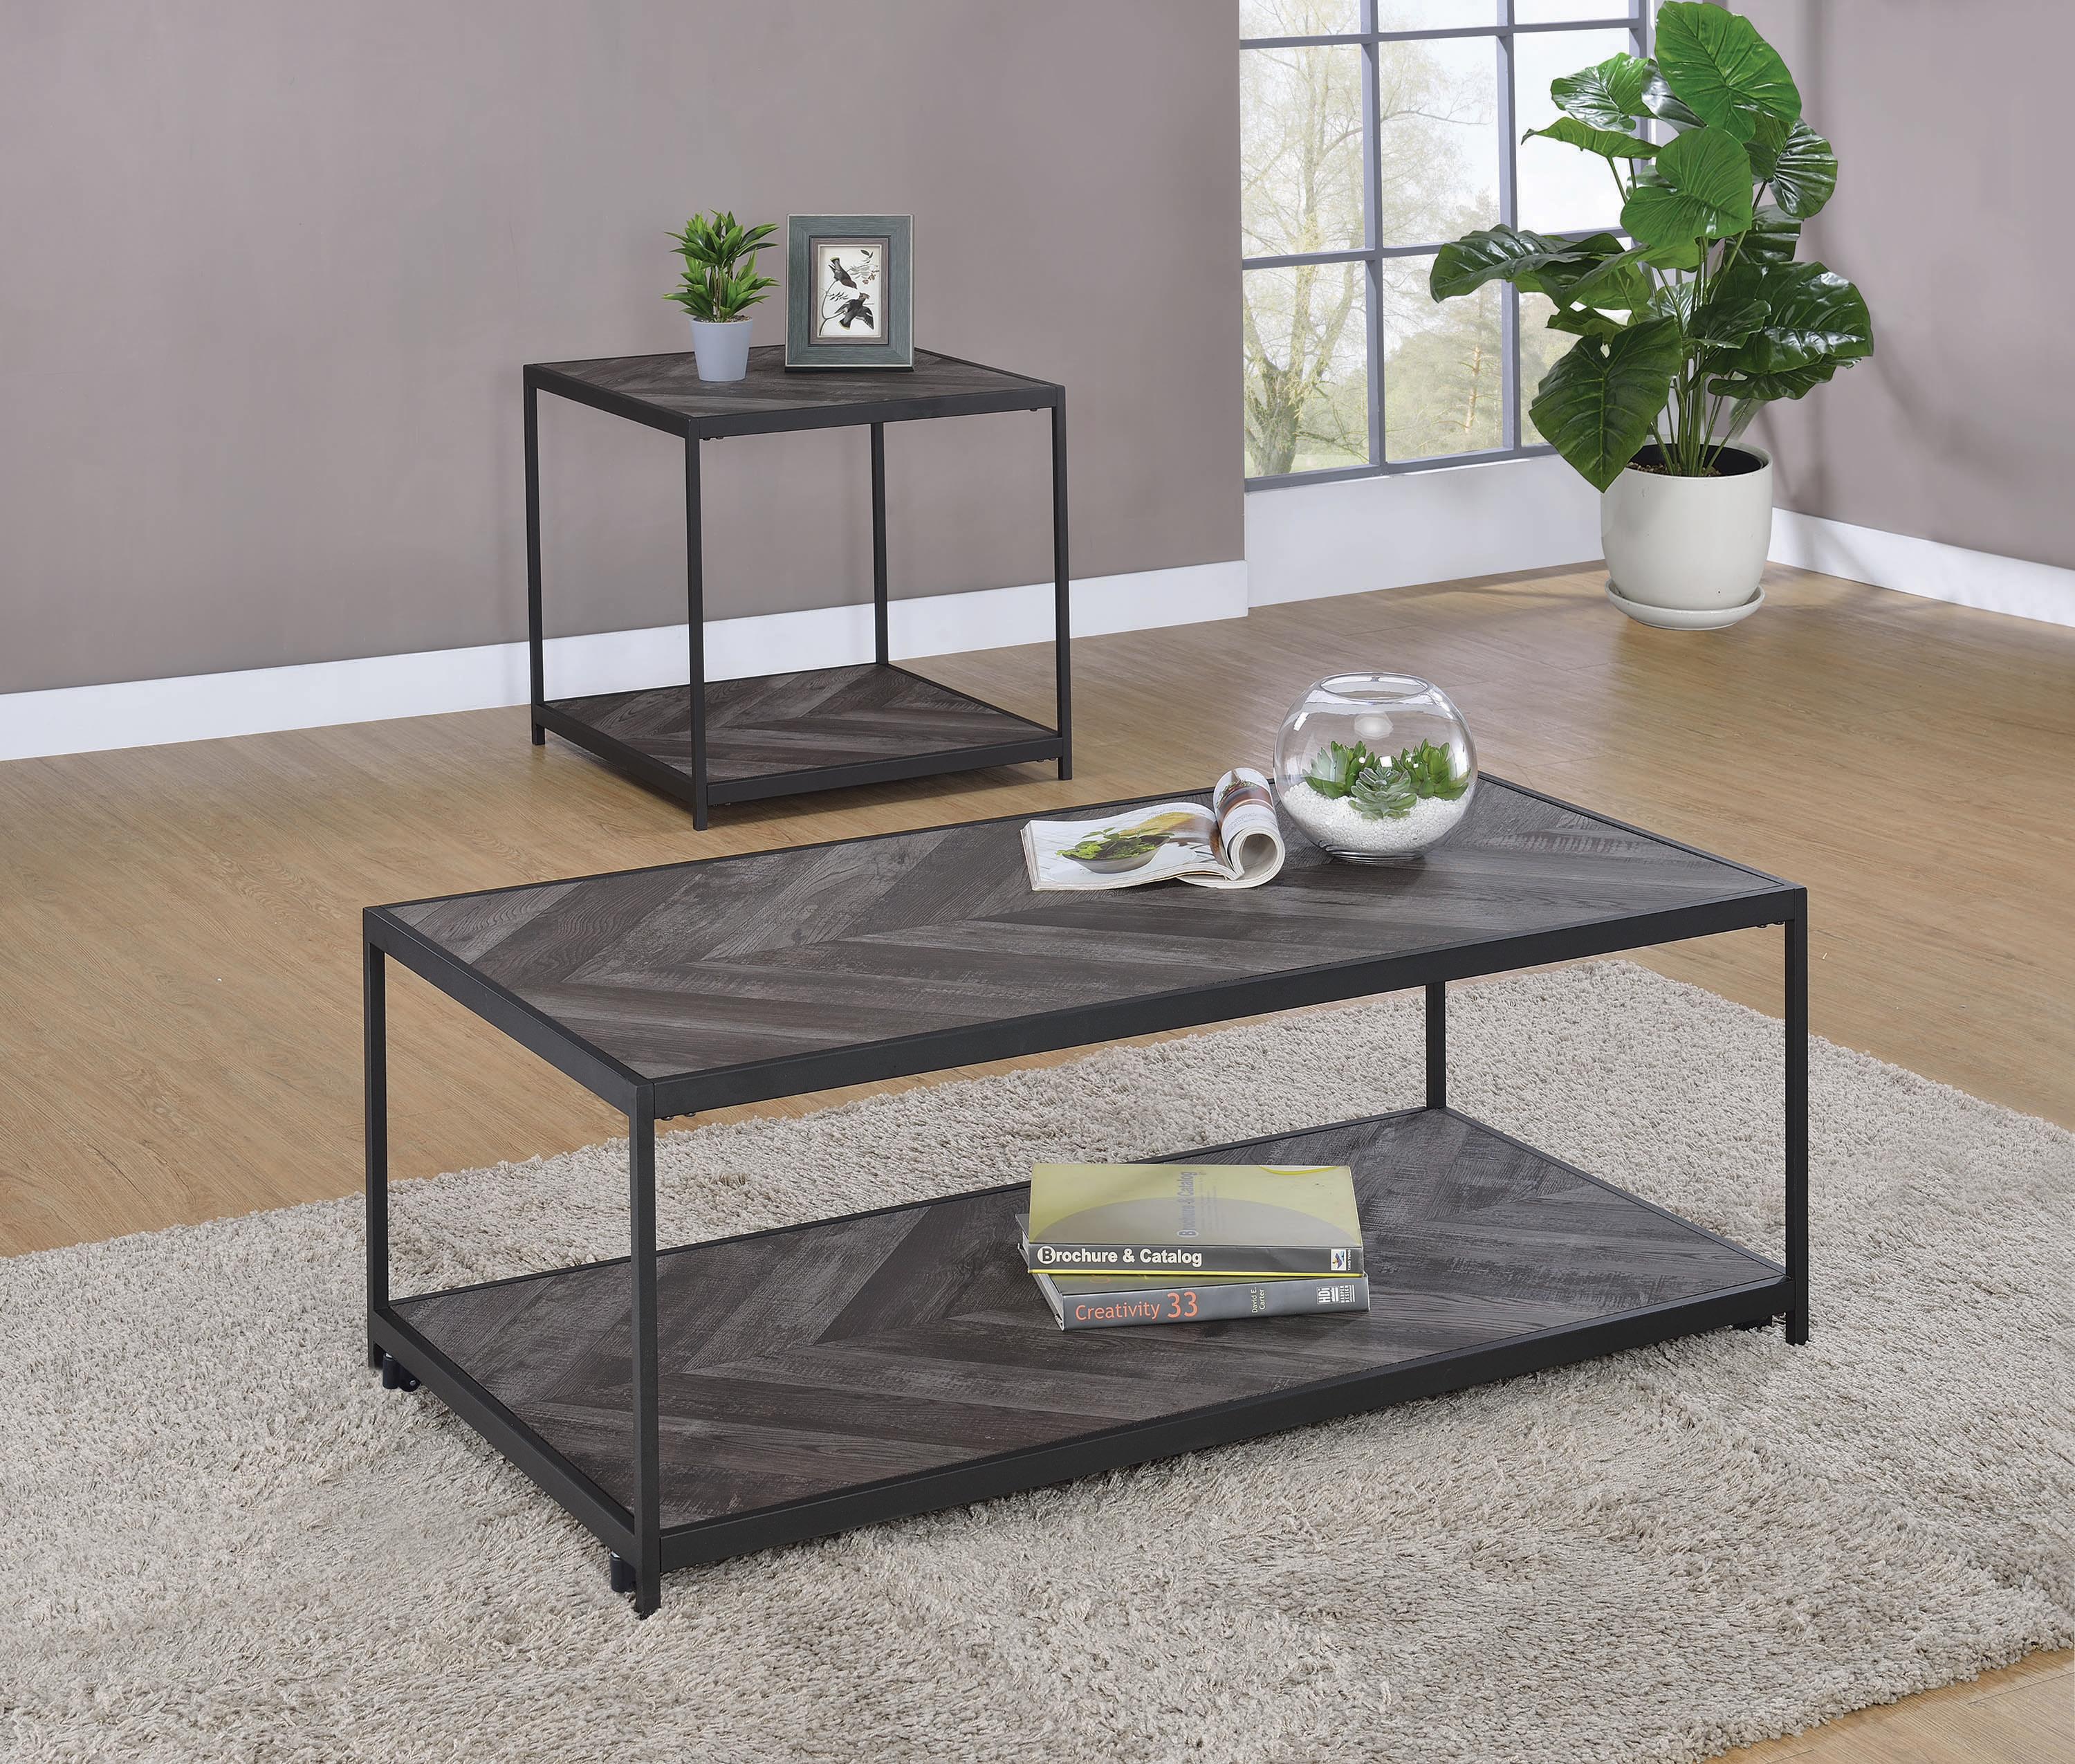 Modern Coffee Table Set 708168-S2 708168-S2 in Gray 